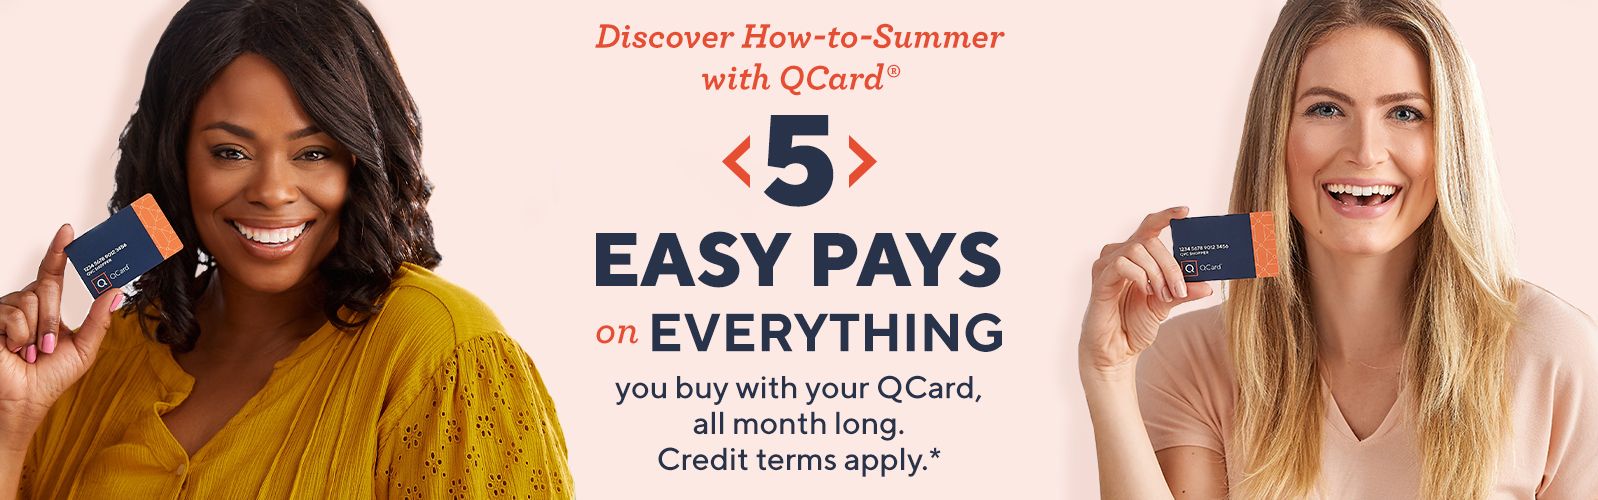 Discover How-to-Summer with QCard®: 5 Easy Pays on Everything you buy with your QCard, all month long. Credit terms apply.*